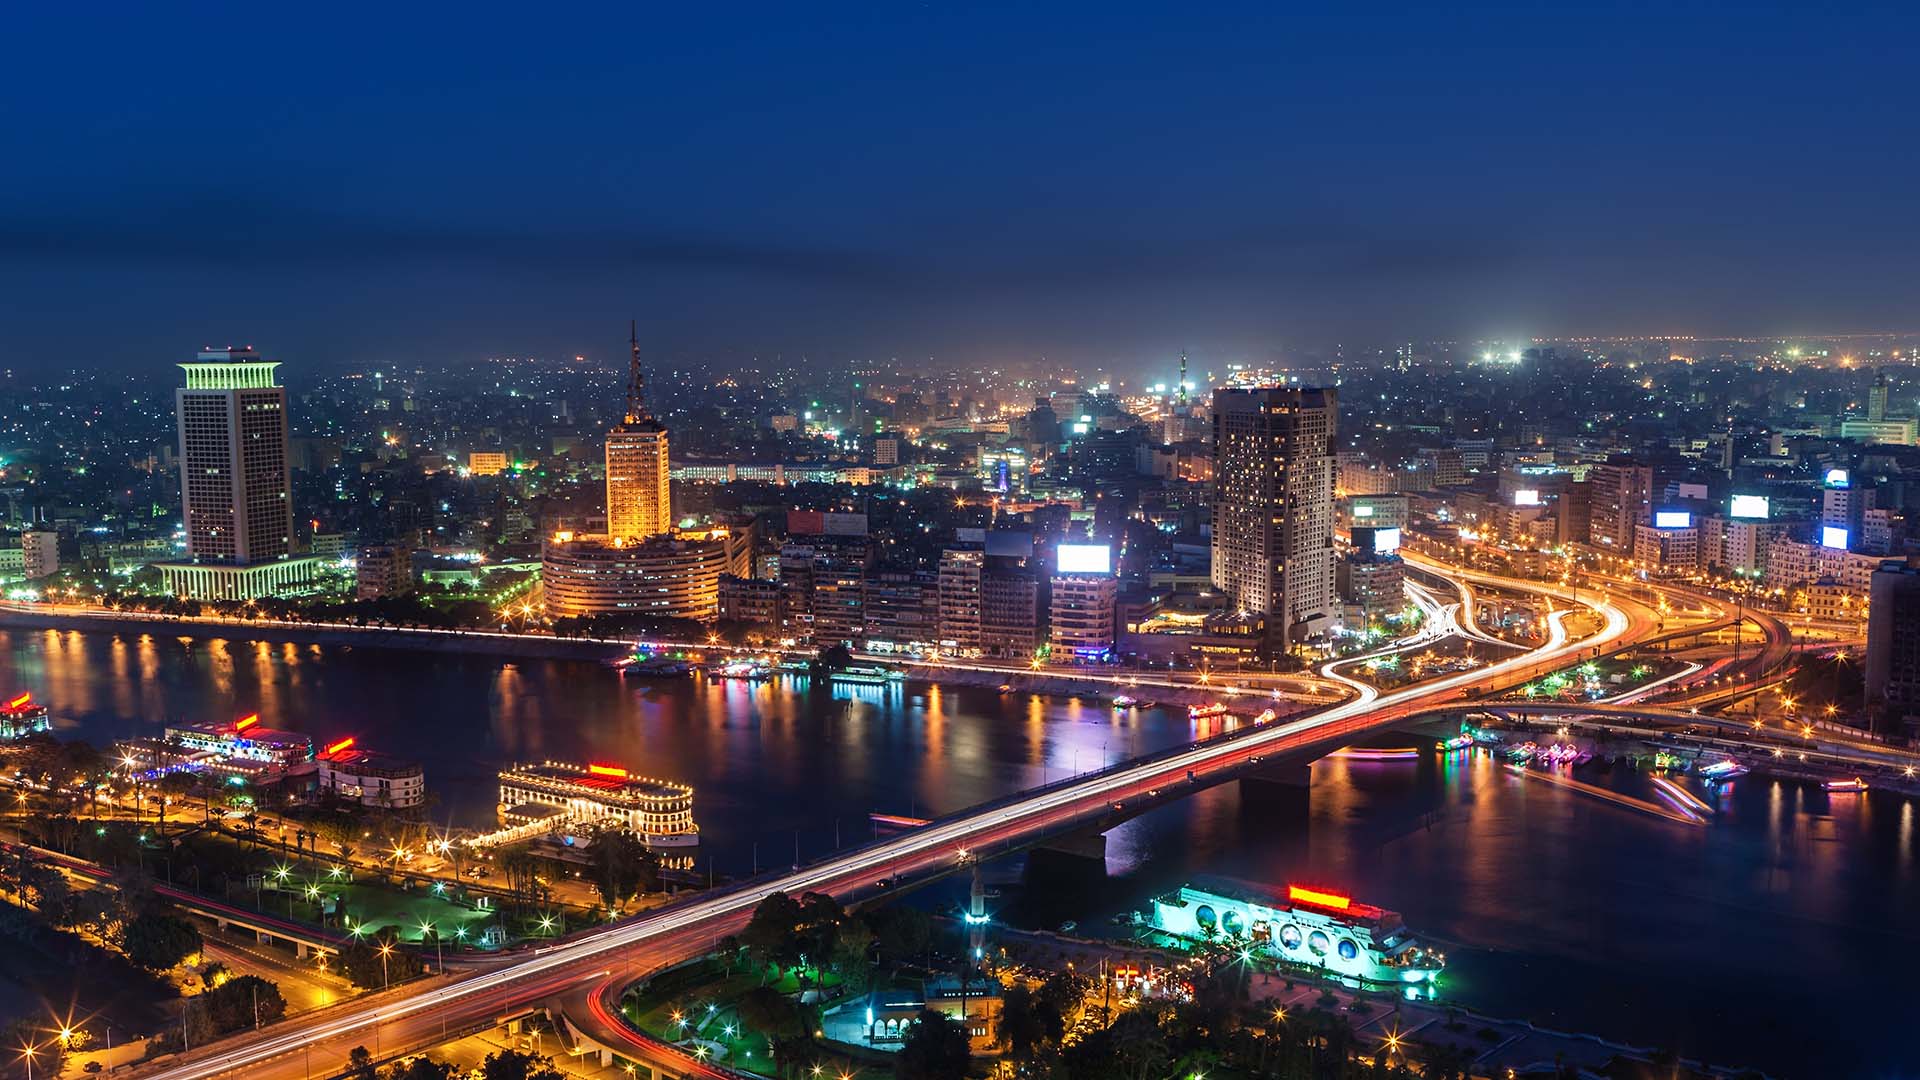 Cairo on Trend: Find Glamorous Egyptian Experiences in New Cairo and Beyond